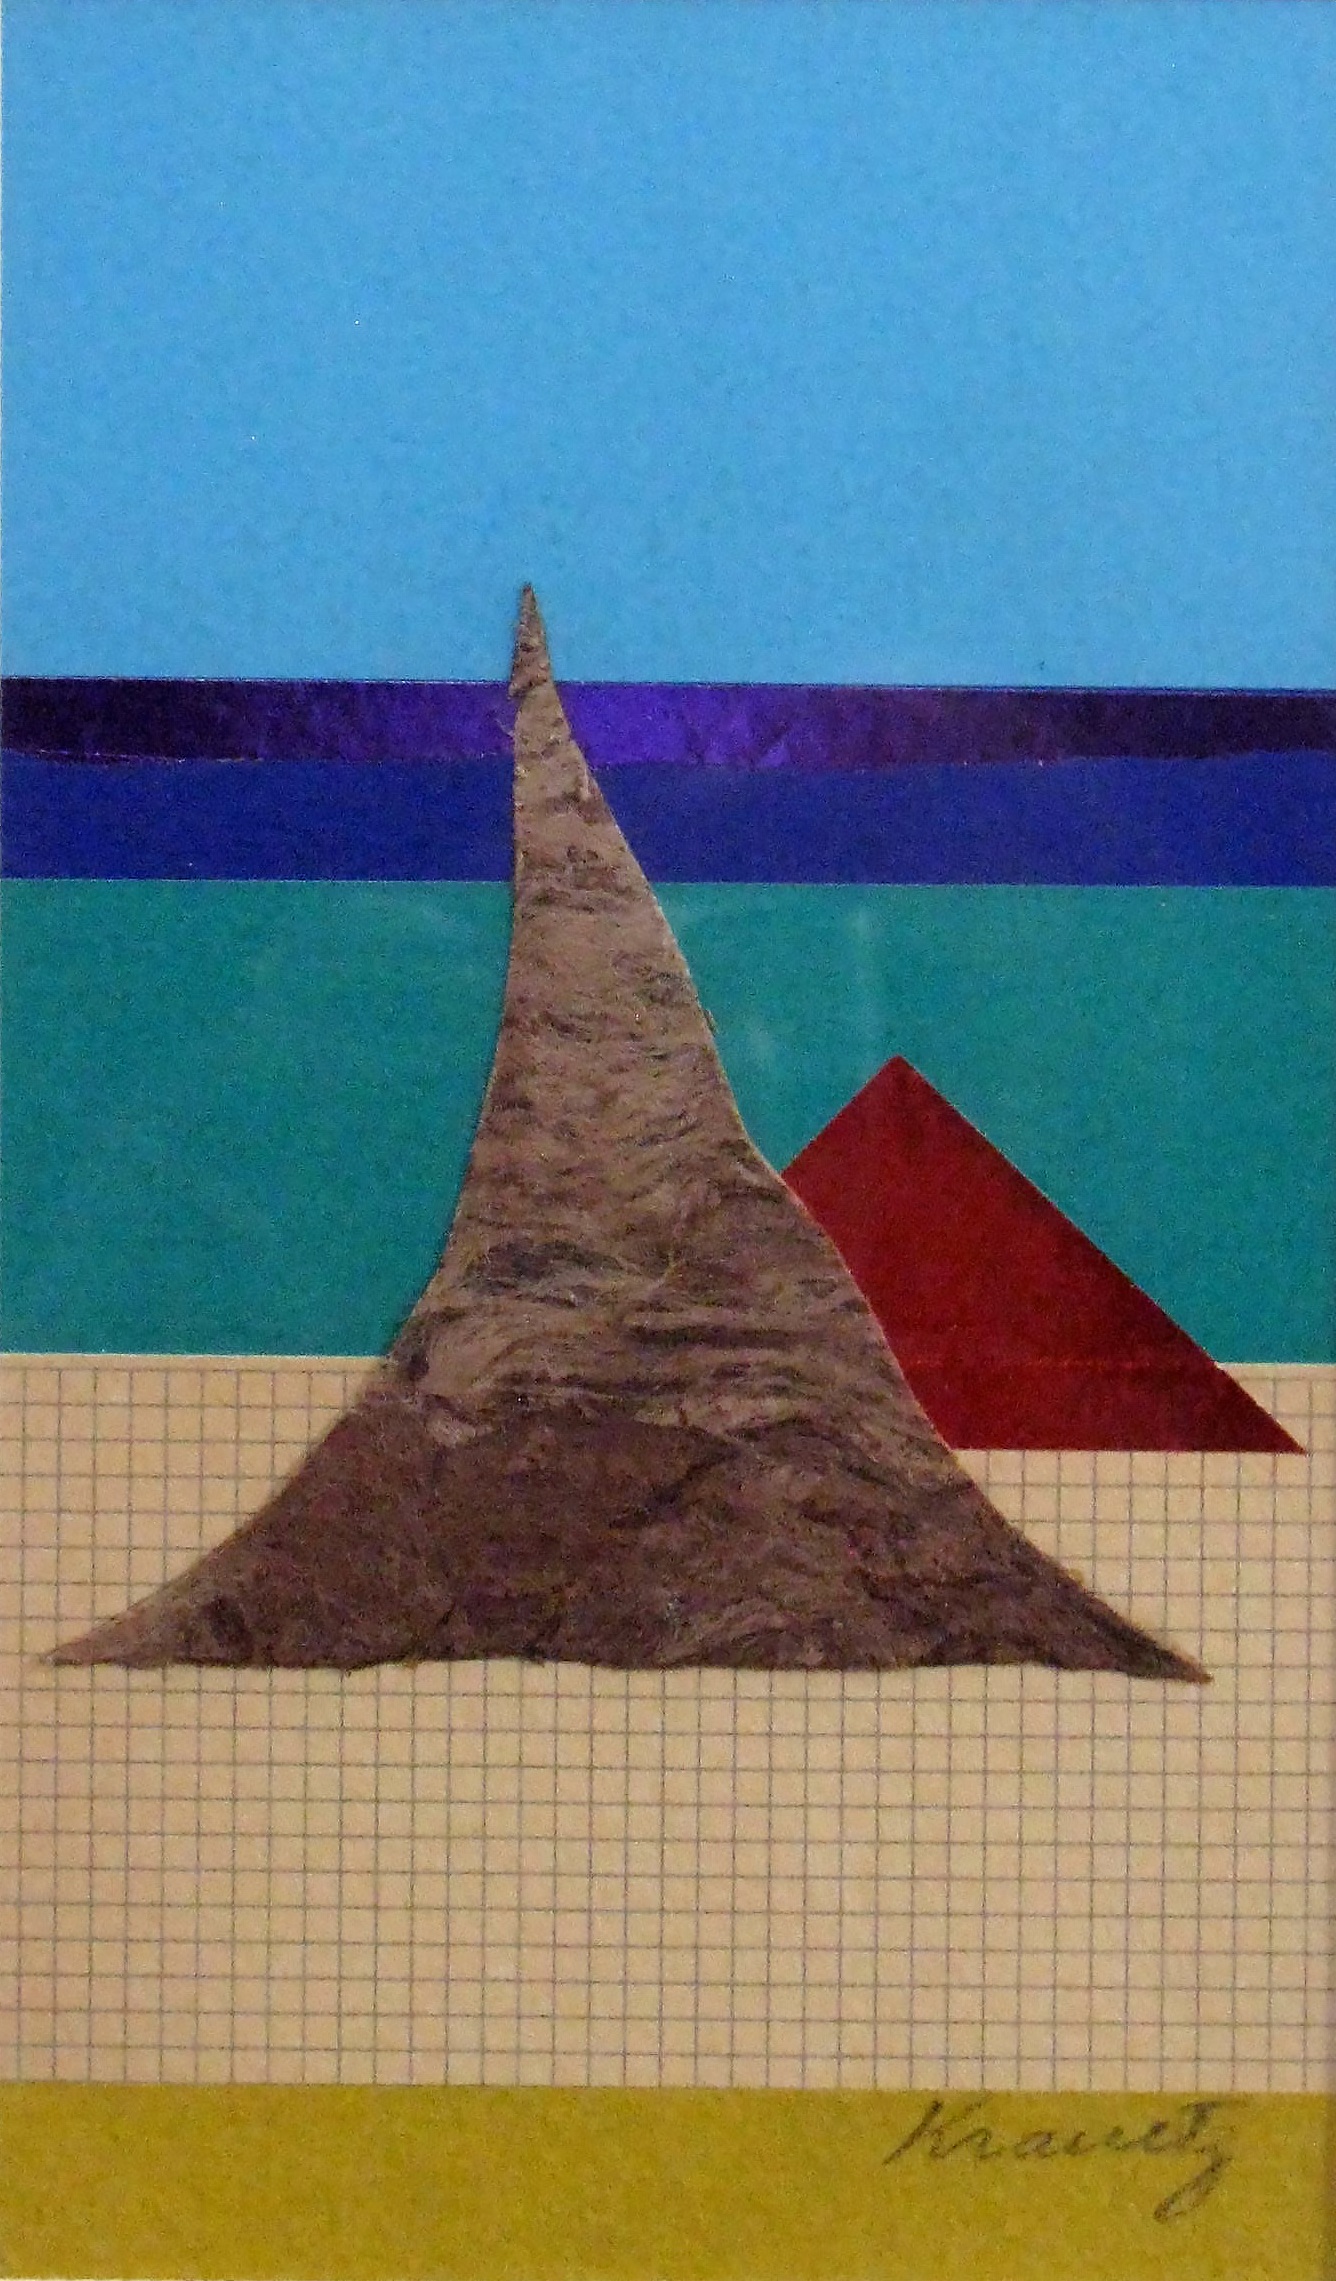 Beach Image, 1994, Collage with Foil and Bark, 16x20 inches with mat